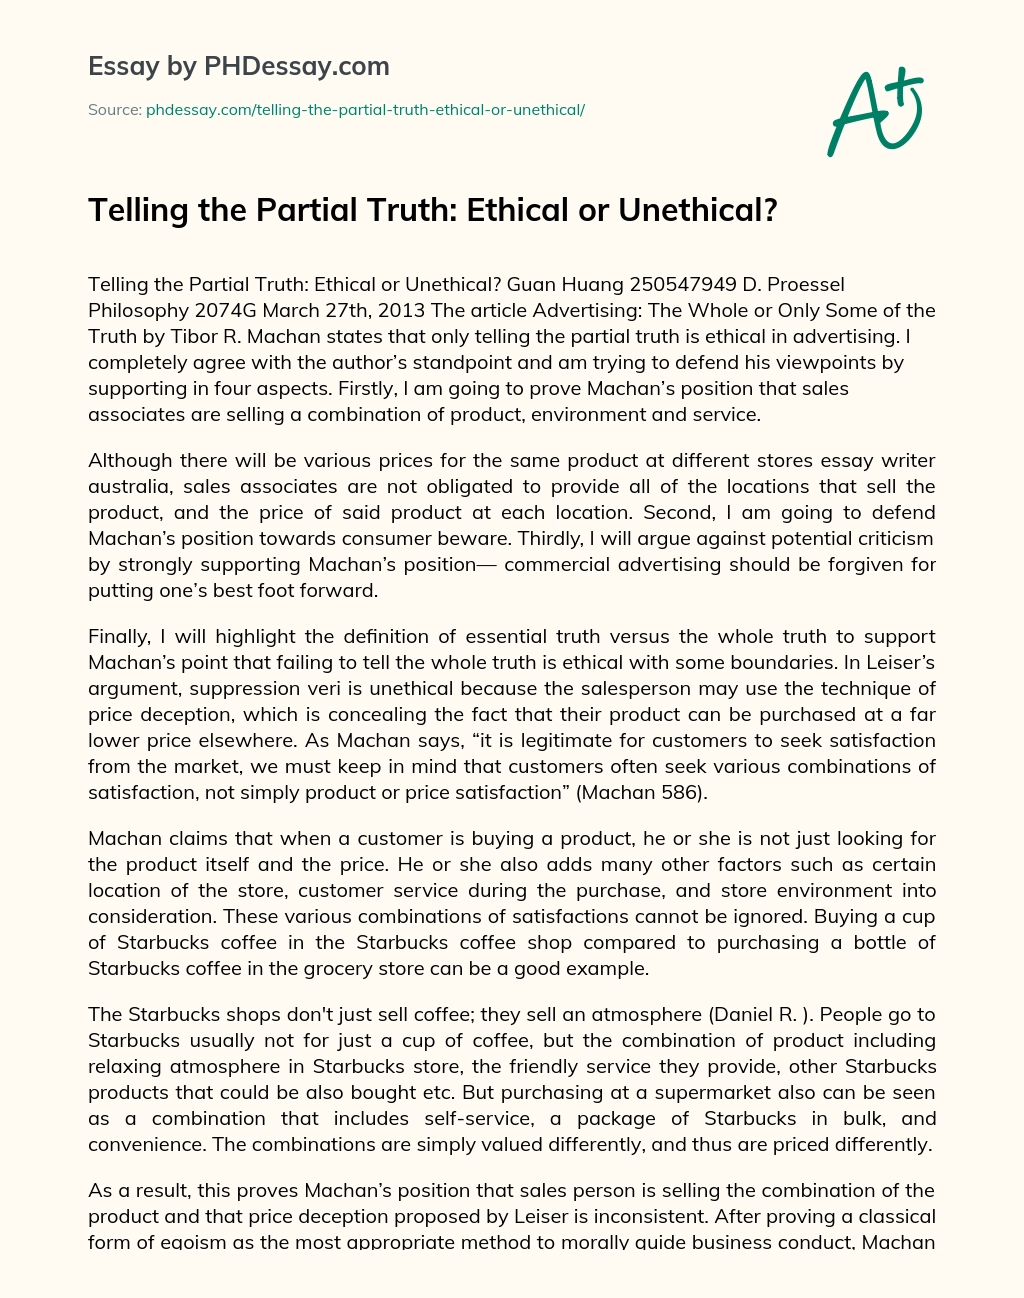 Telling the Partial Truth: Ethical or Unethical? essay